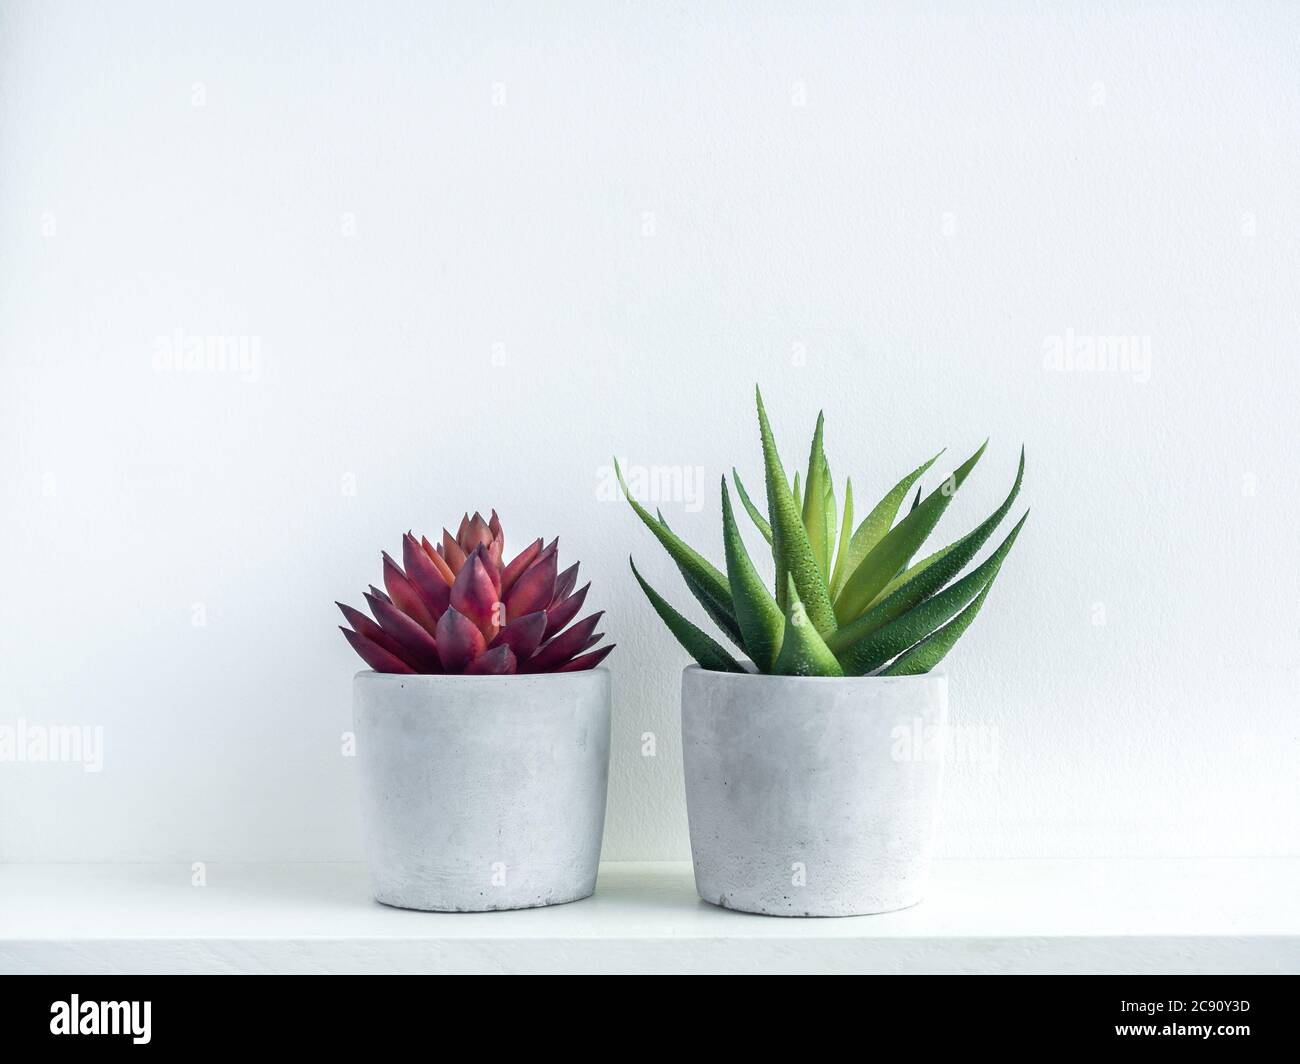 Red and green succulent plants in modern geometric cement planters on white wood shelf on white background. Concrete pots, round shape. Stock Photo